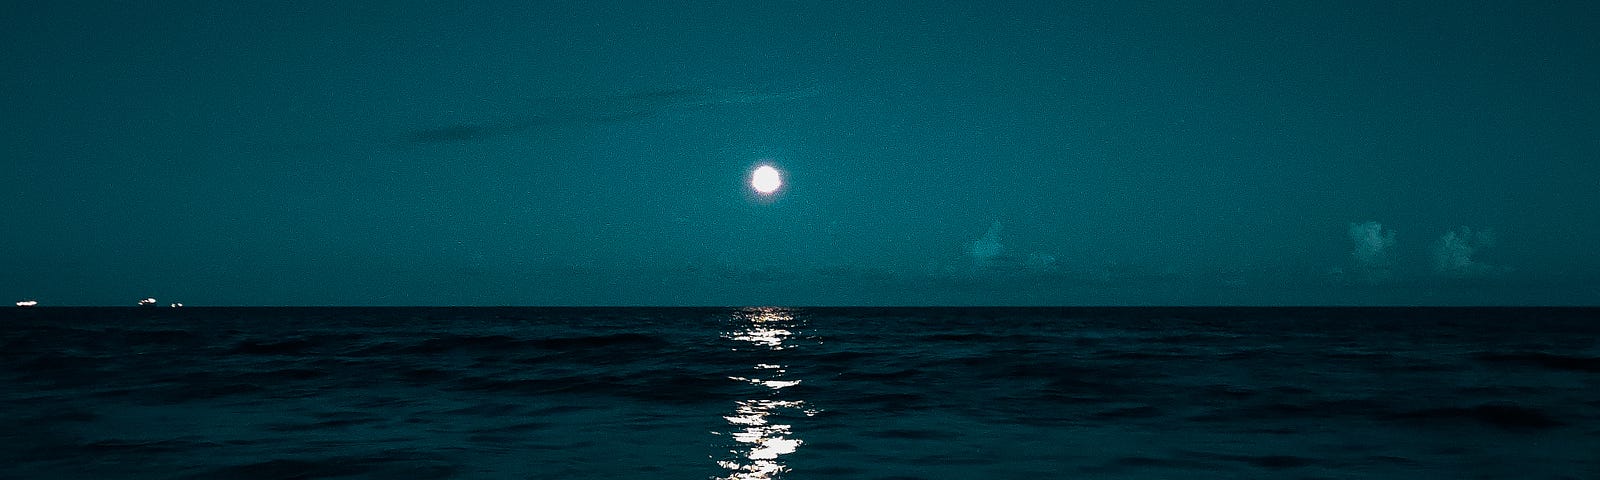 Photo of a beach at night, under a full moon. The sky is shades of dark turquiose, and the water looks darker with the night. A gentle wave meets the sandy beach with white motion in the dark night.